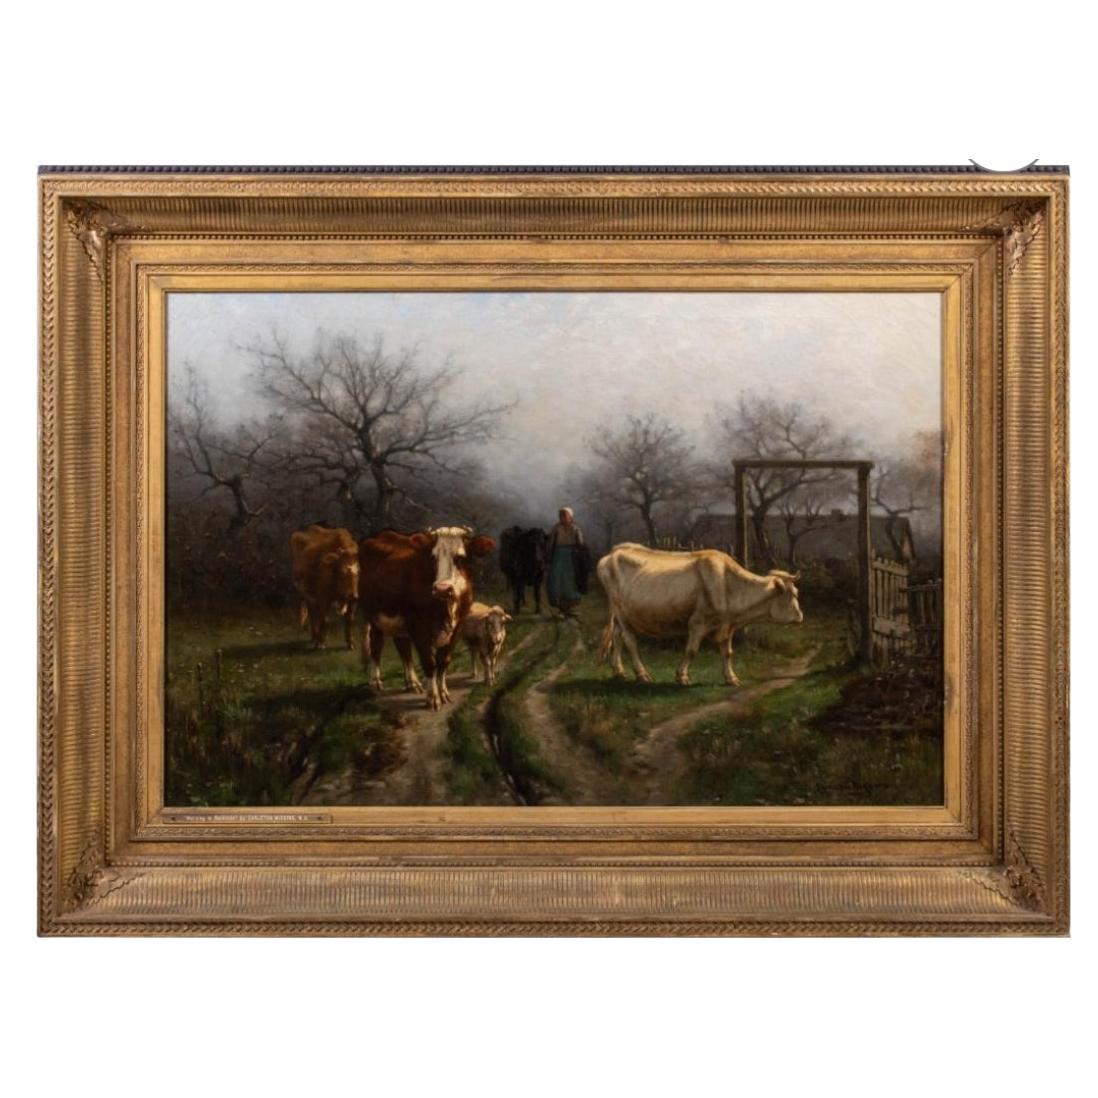 Early 20th Century Oil on Canvas Painting "Morning in France" Signed & Framed